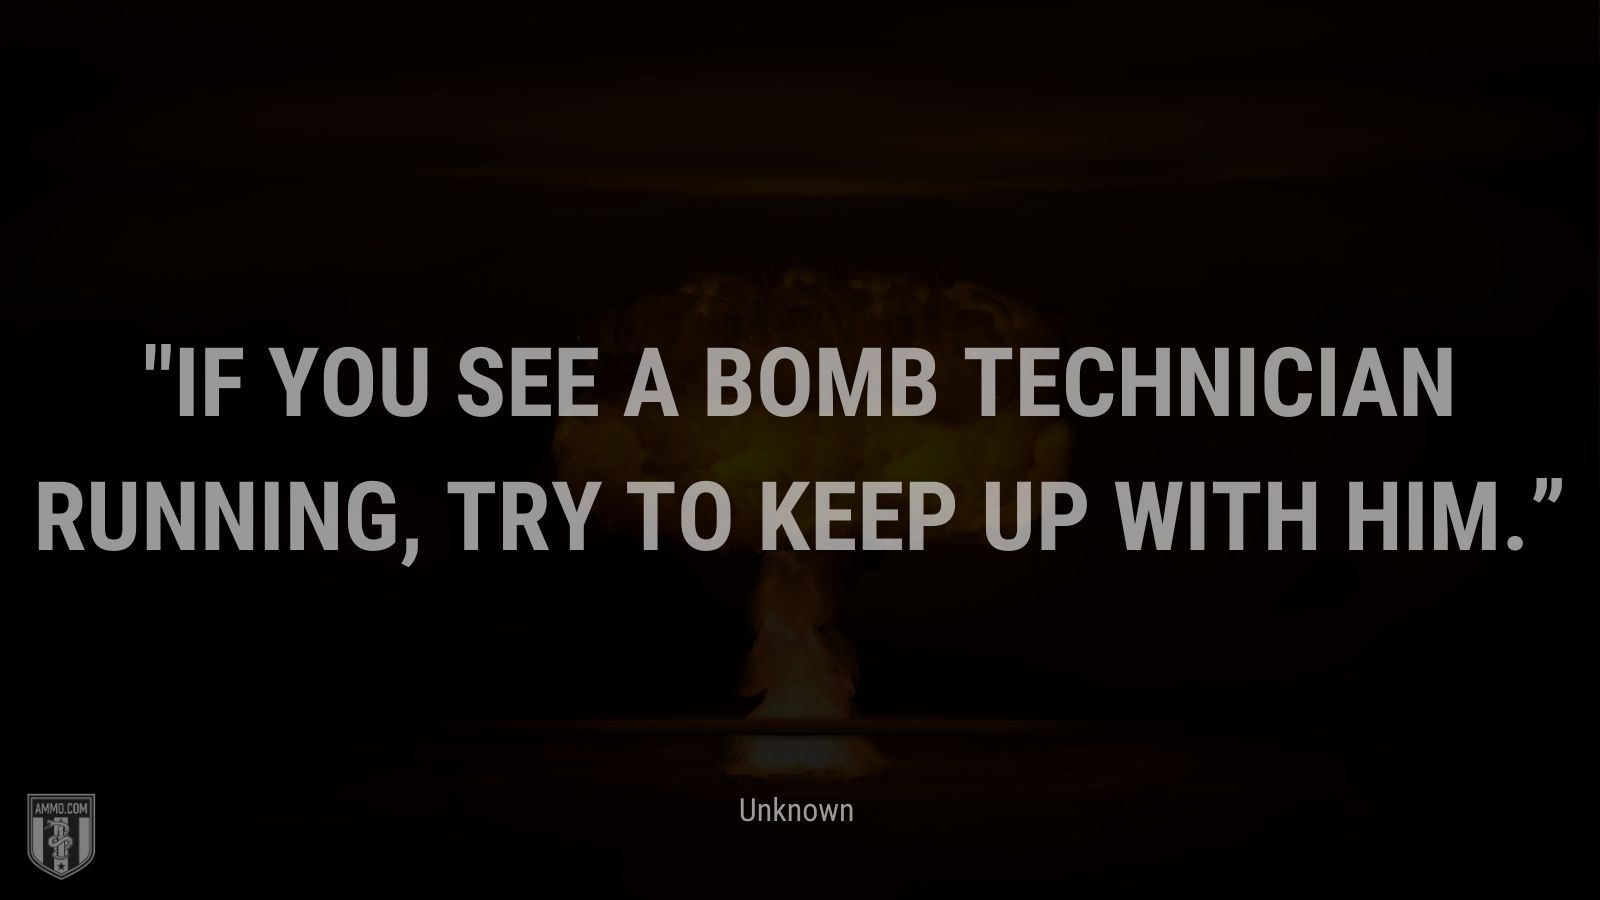 “If you see a bomb technician running, try to keep up with him.” - Unknown